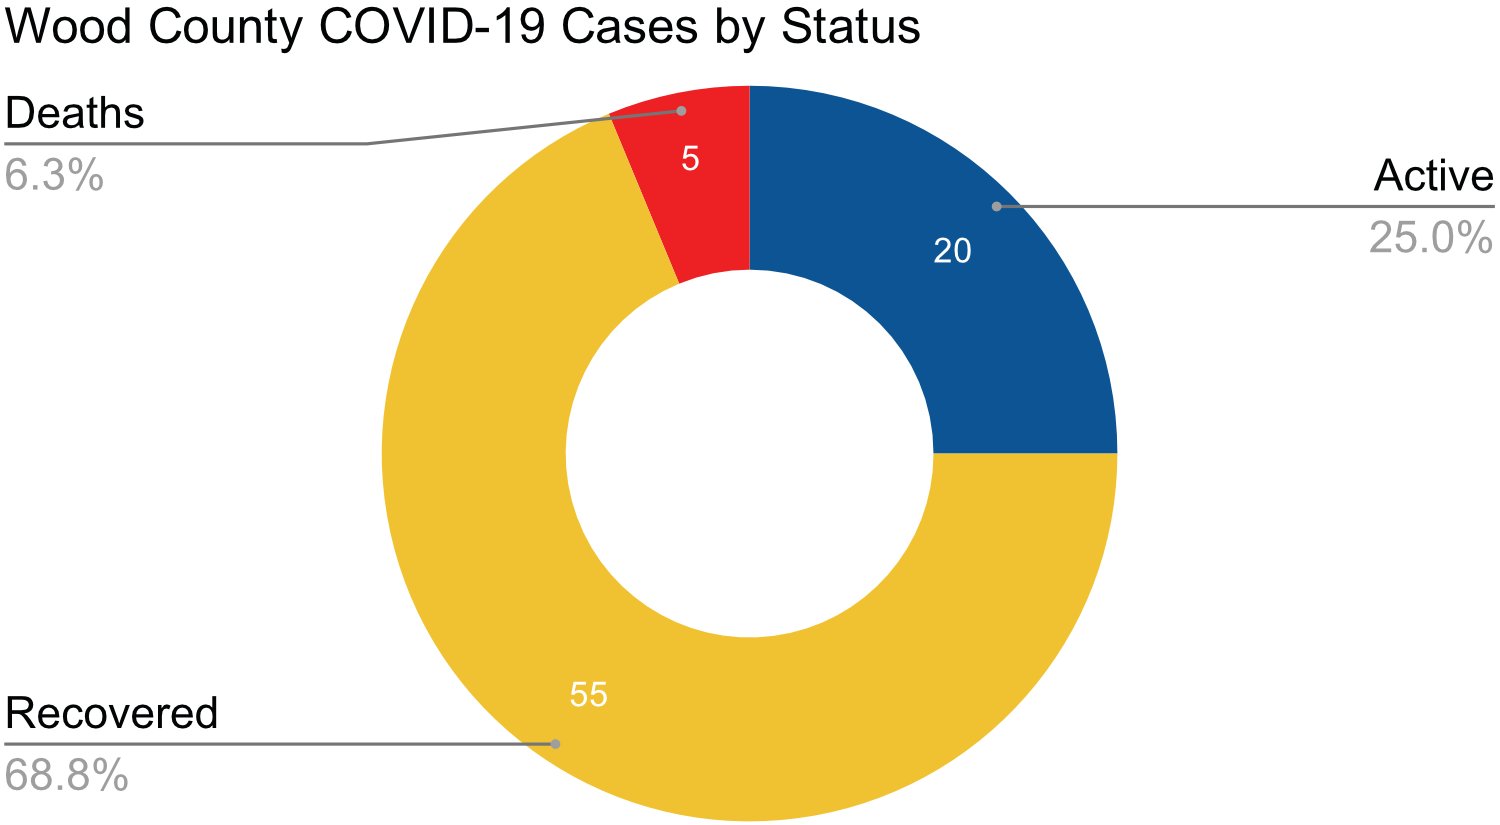 Of all cases to date in Wood County, 68.8% have recovered, 25% remain active, and 6.3% have died of COVID-19.